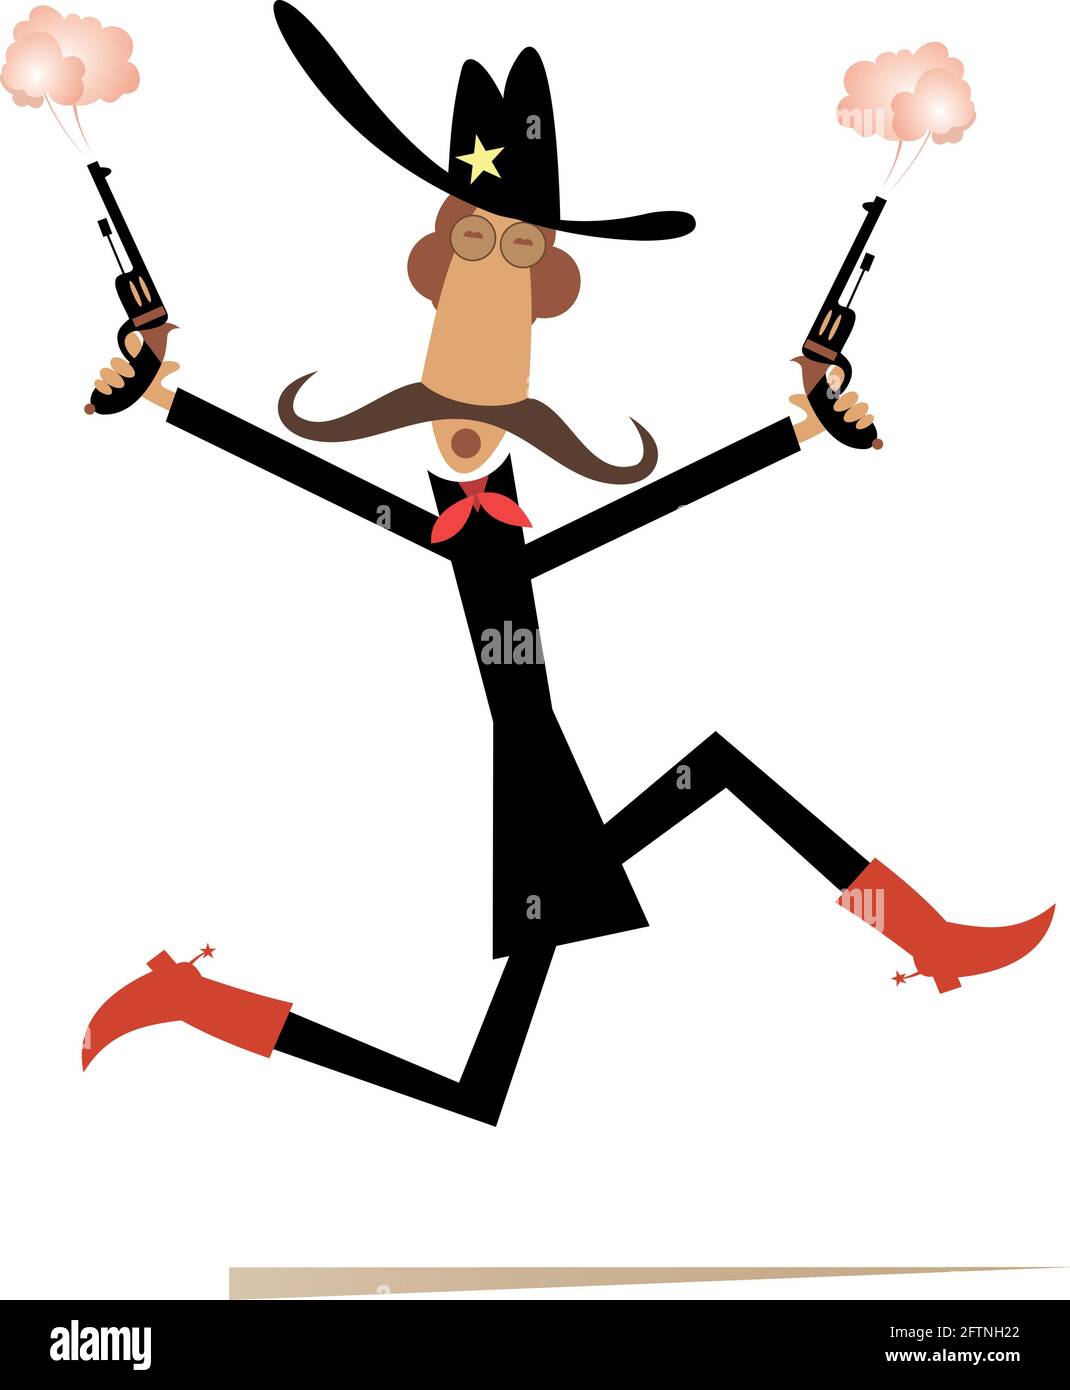 Comic man with guns in the hands illustration. Running cowboy in the big hat fires the pistols isolated on white Stock Vector